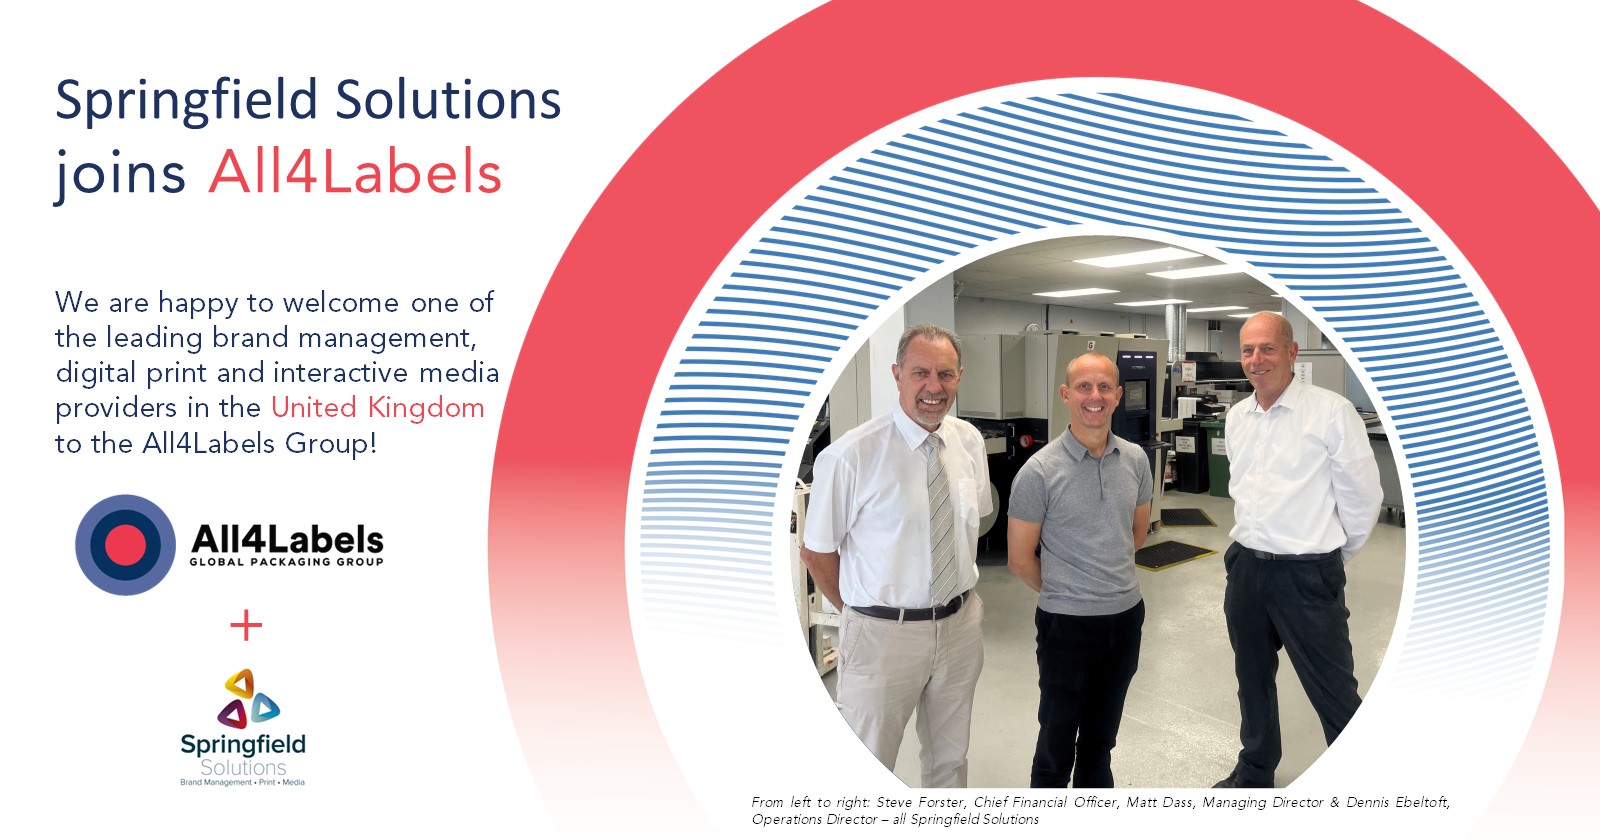 Springfield Solutions joins All4Labels Group